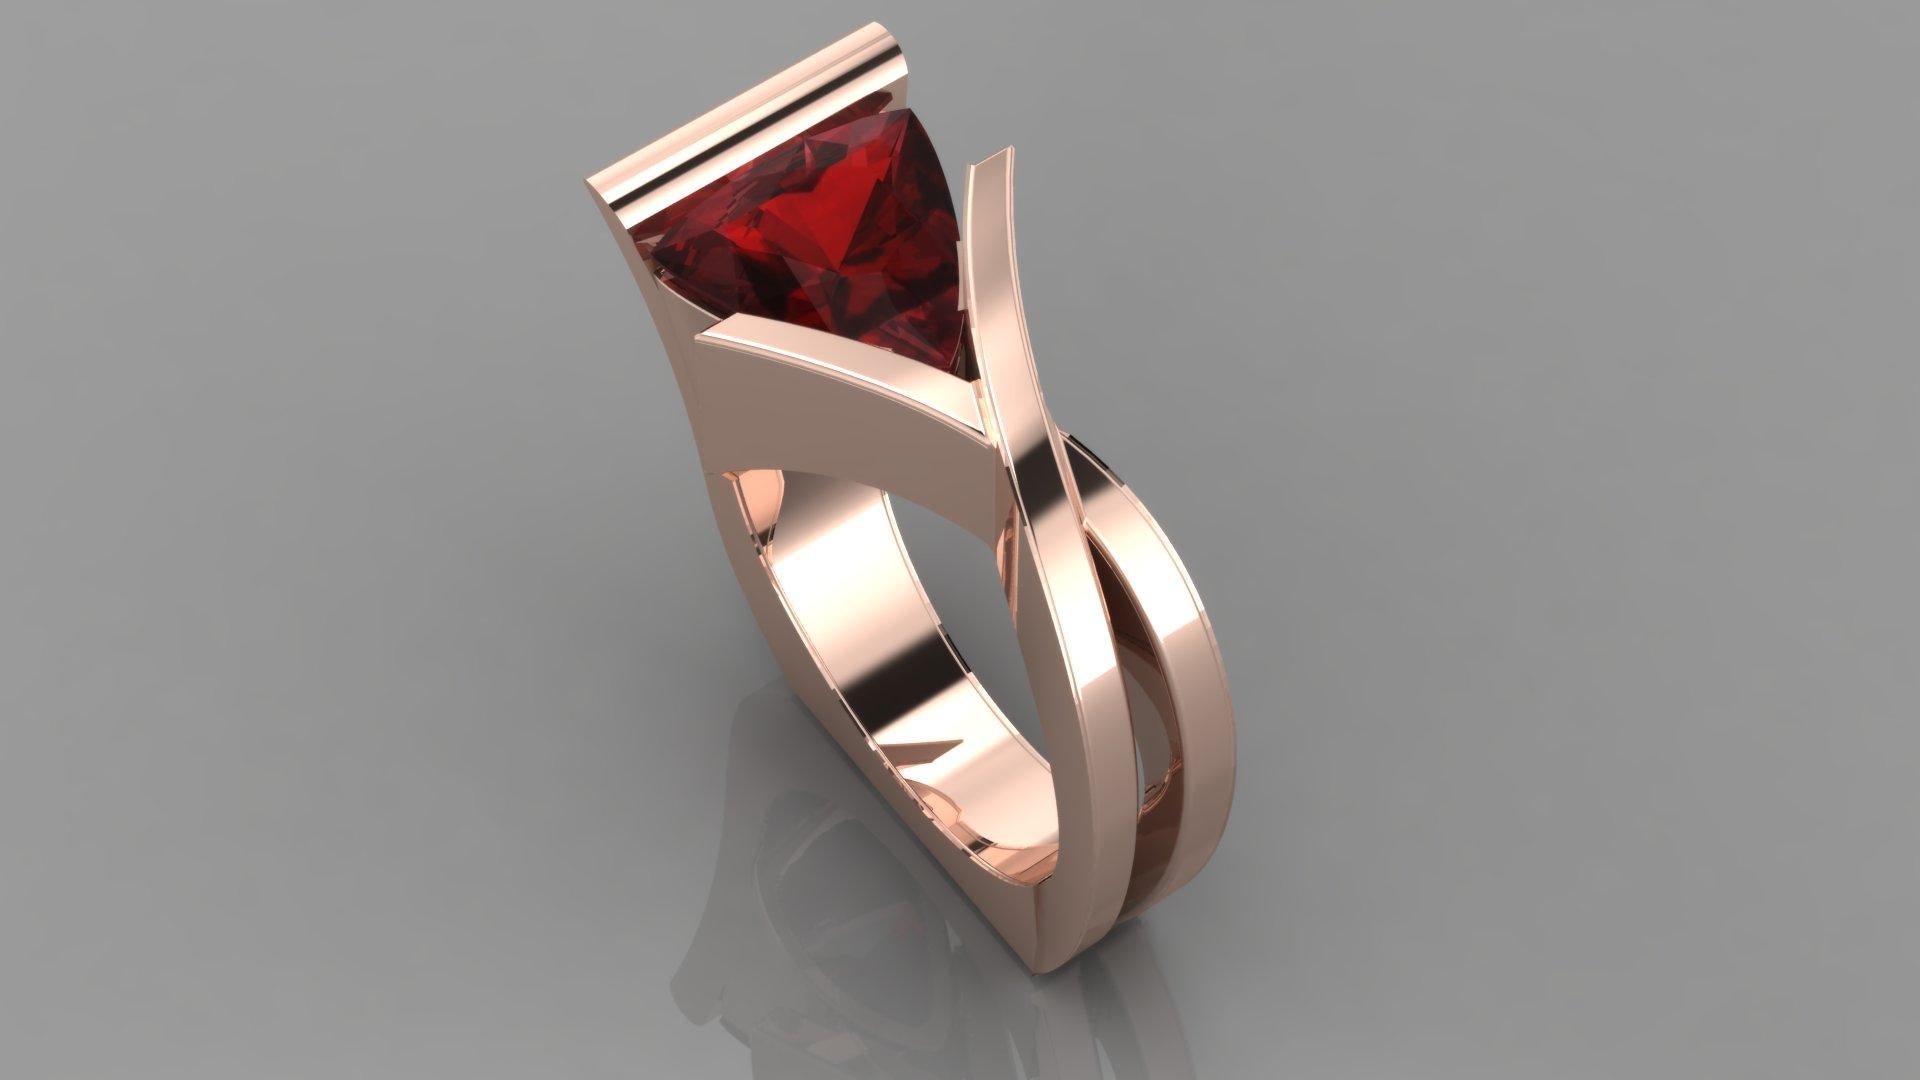 18k rose gold ring with a 4.00 carat rubellite Tourmaline and a .10 carat G color VS1 clarity diamond.

